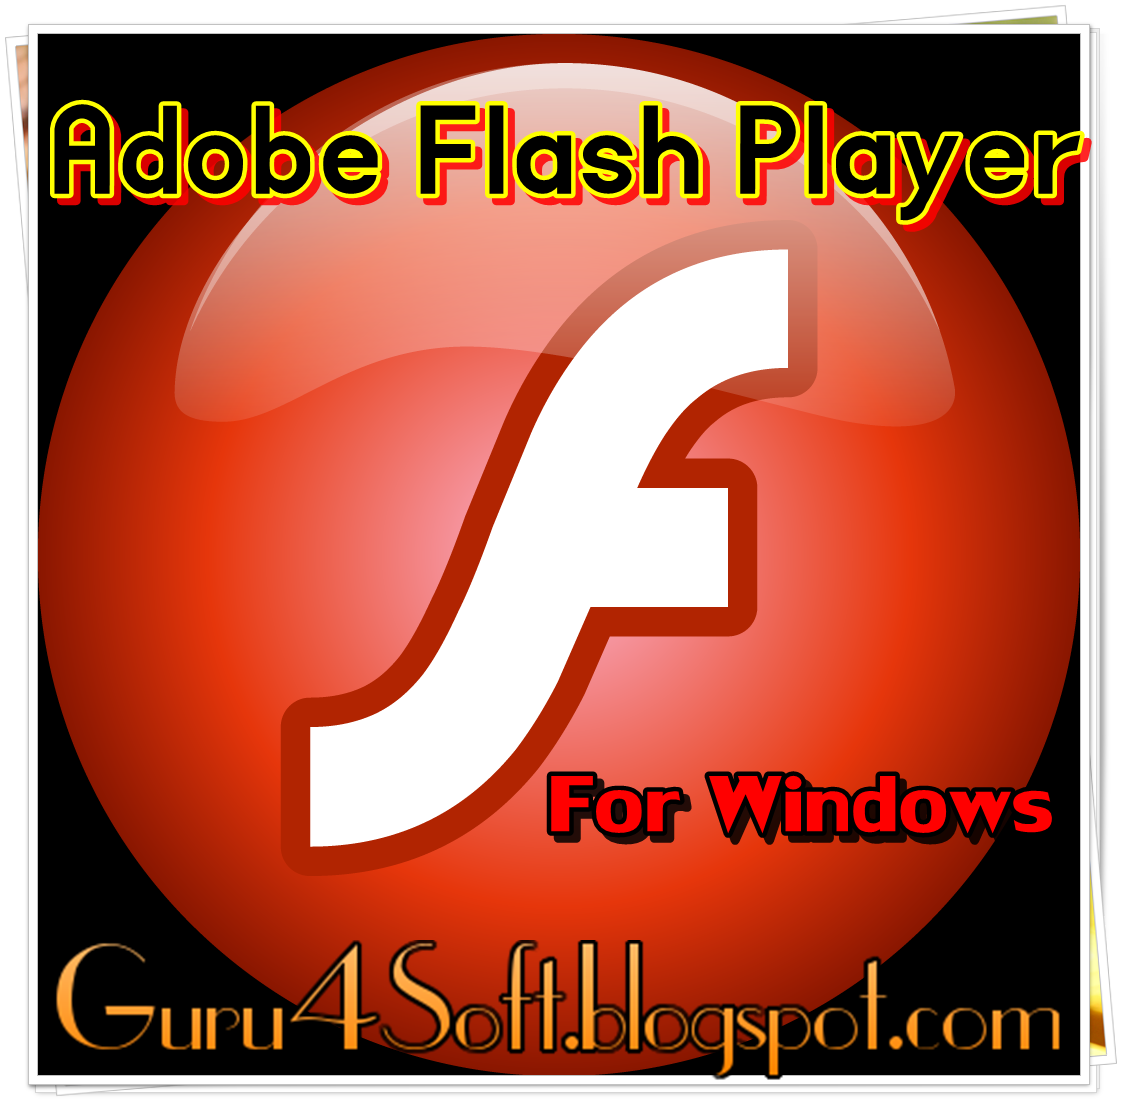 Download Adobe Flash Player Beta 13.0.0.133 Stable for 